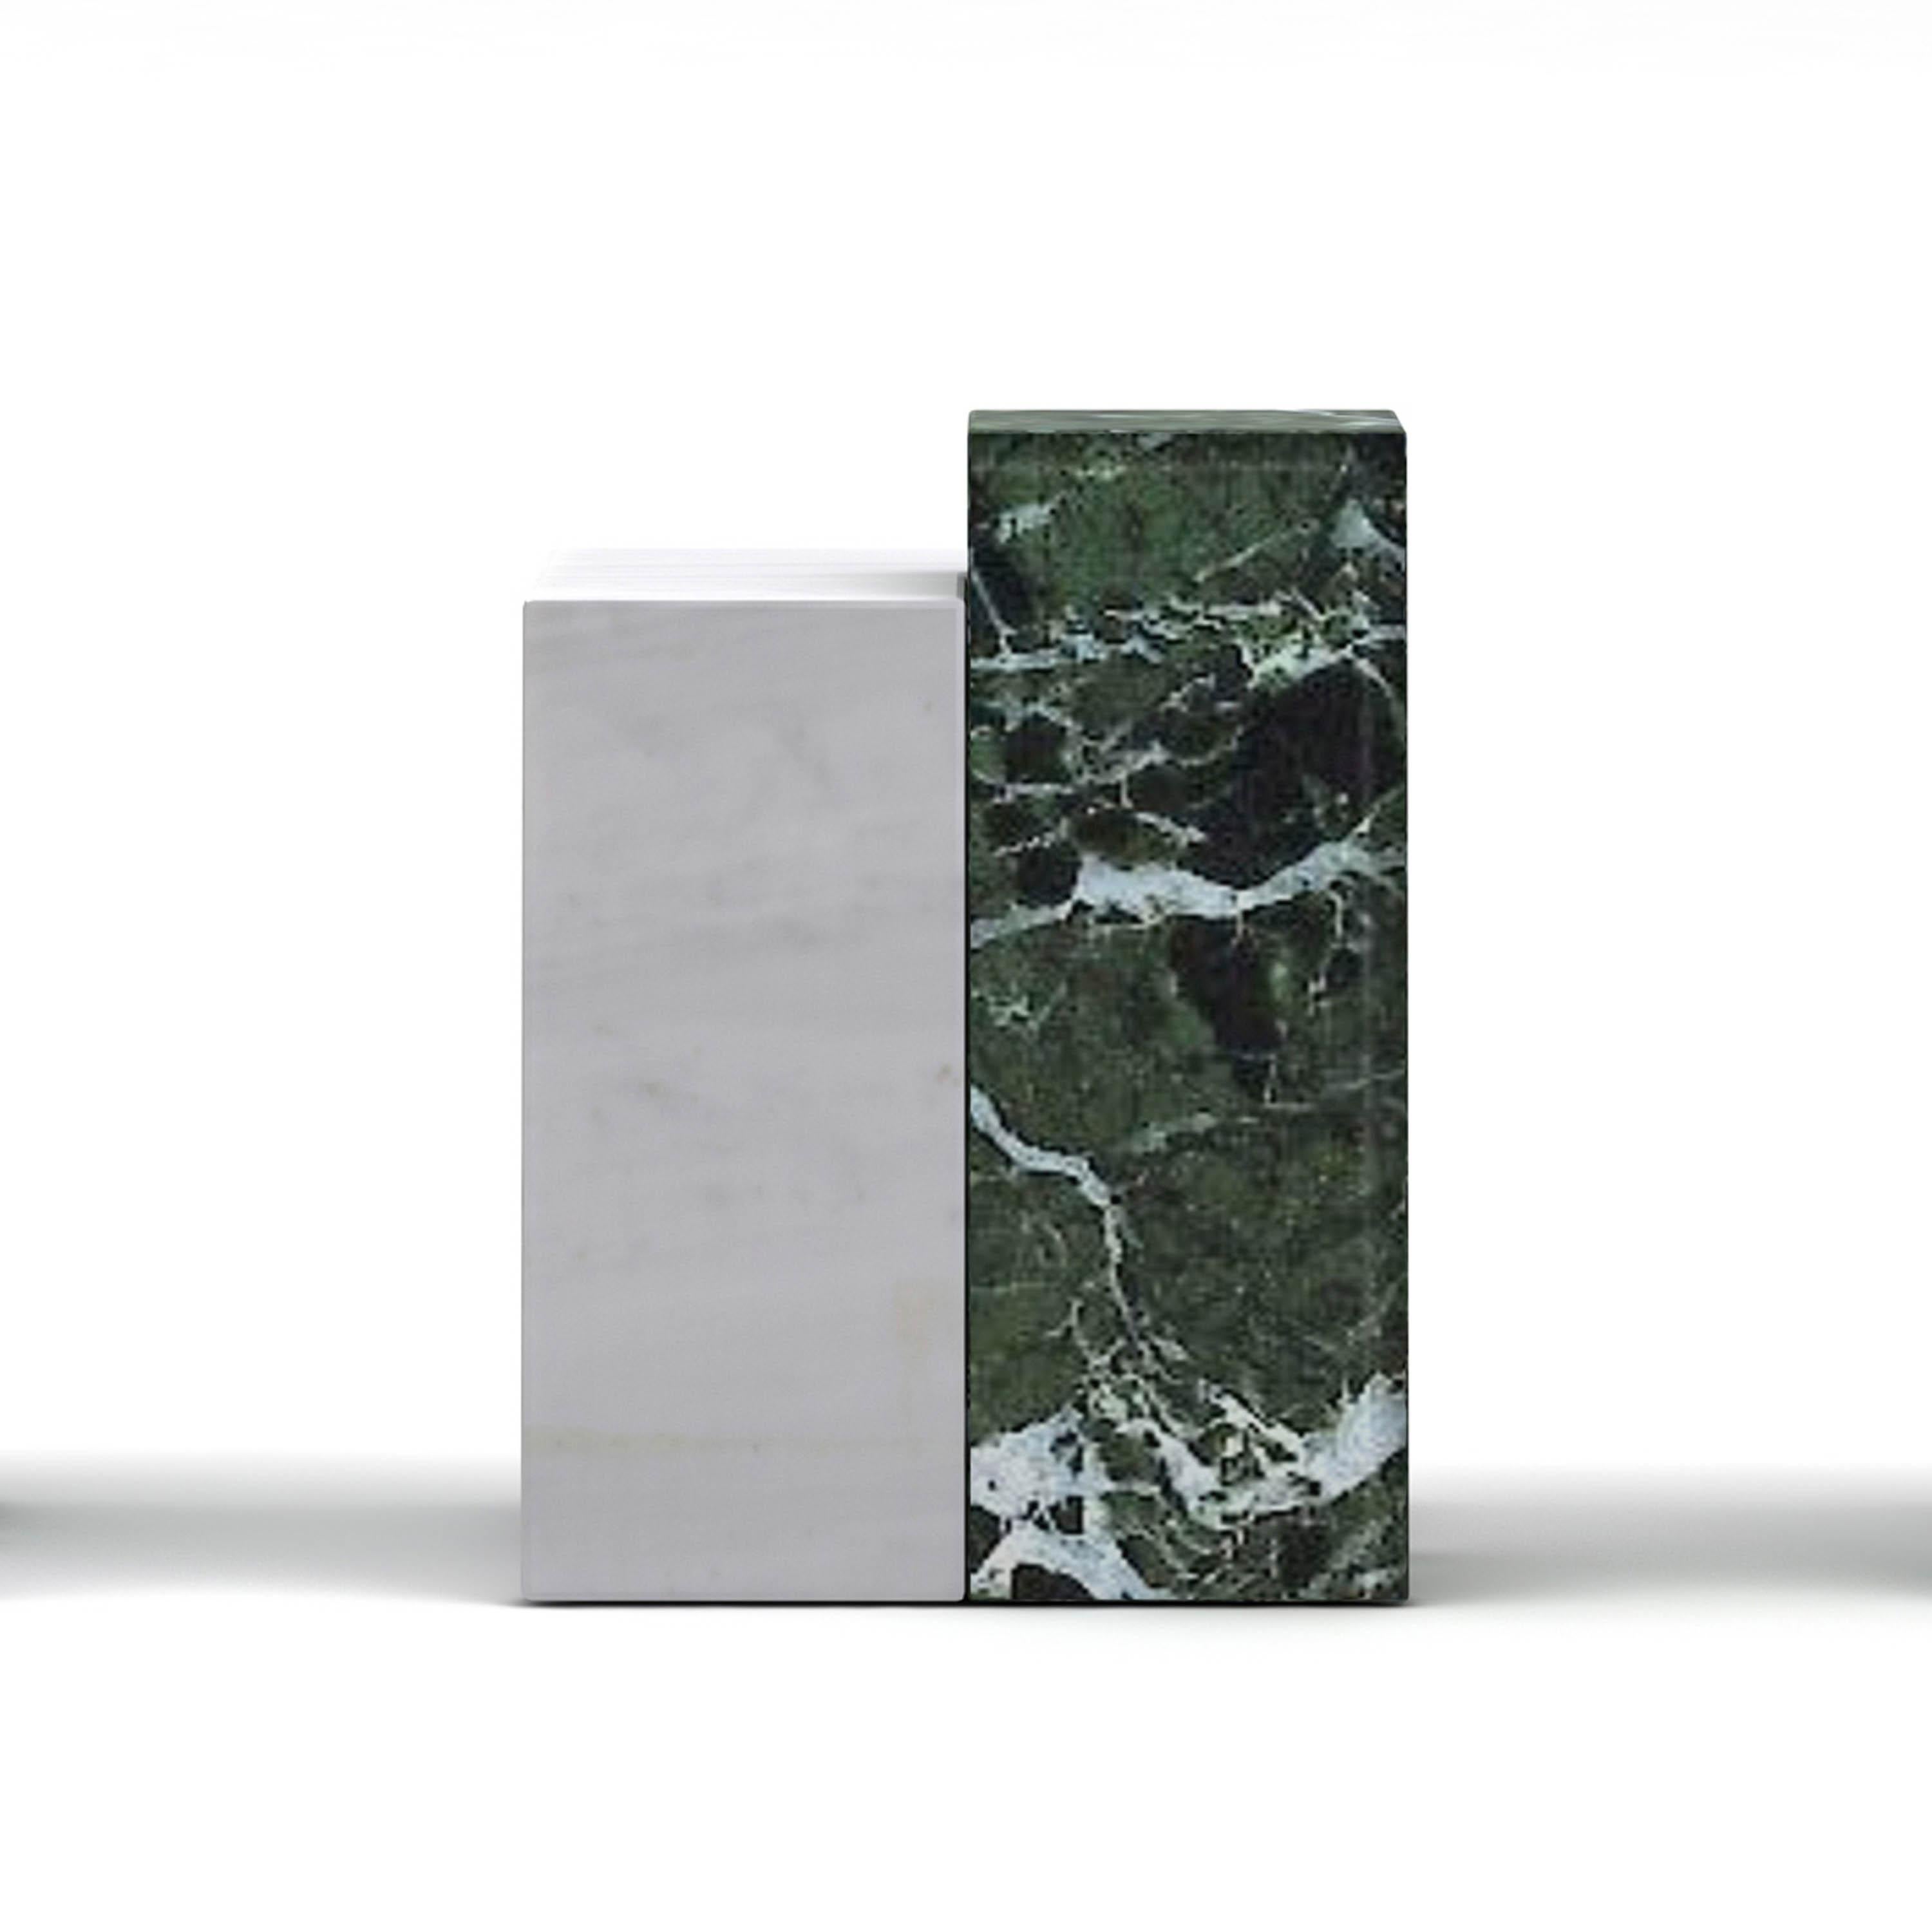 Minimal Irigoni Side Table from Greek White and Green Marble (Griechisch) im Angebot